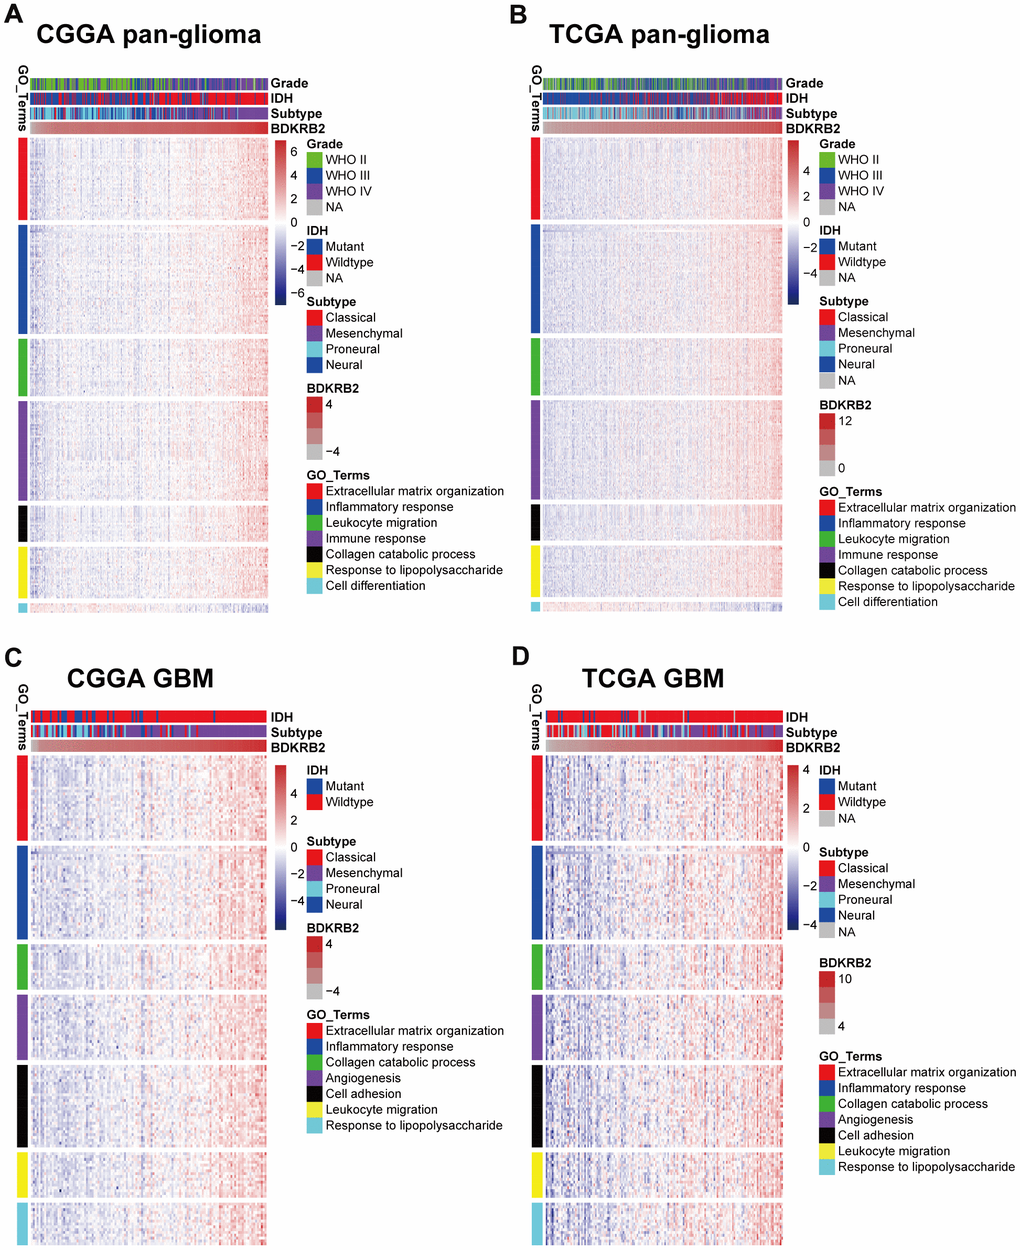 Gene Ontology analysis for BDKRB2 in pan-glioma (A, B) and glioblastoma (C, D).